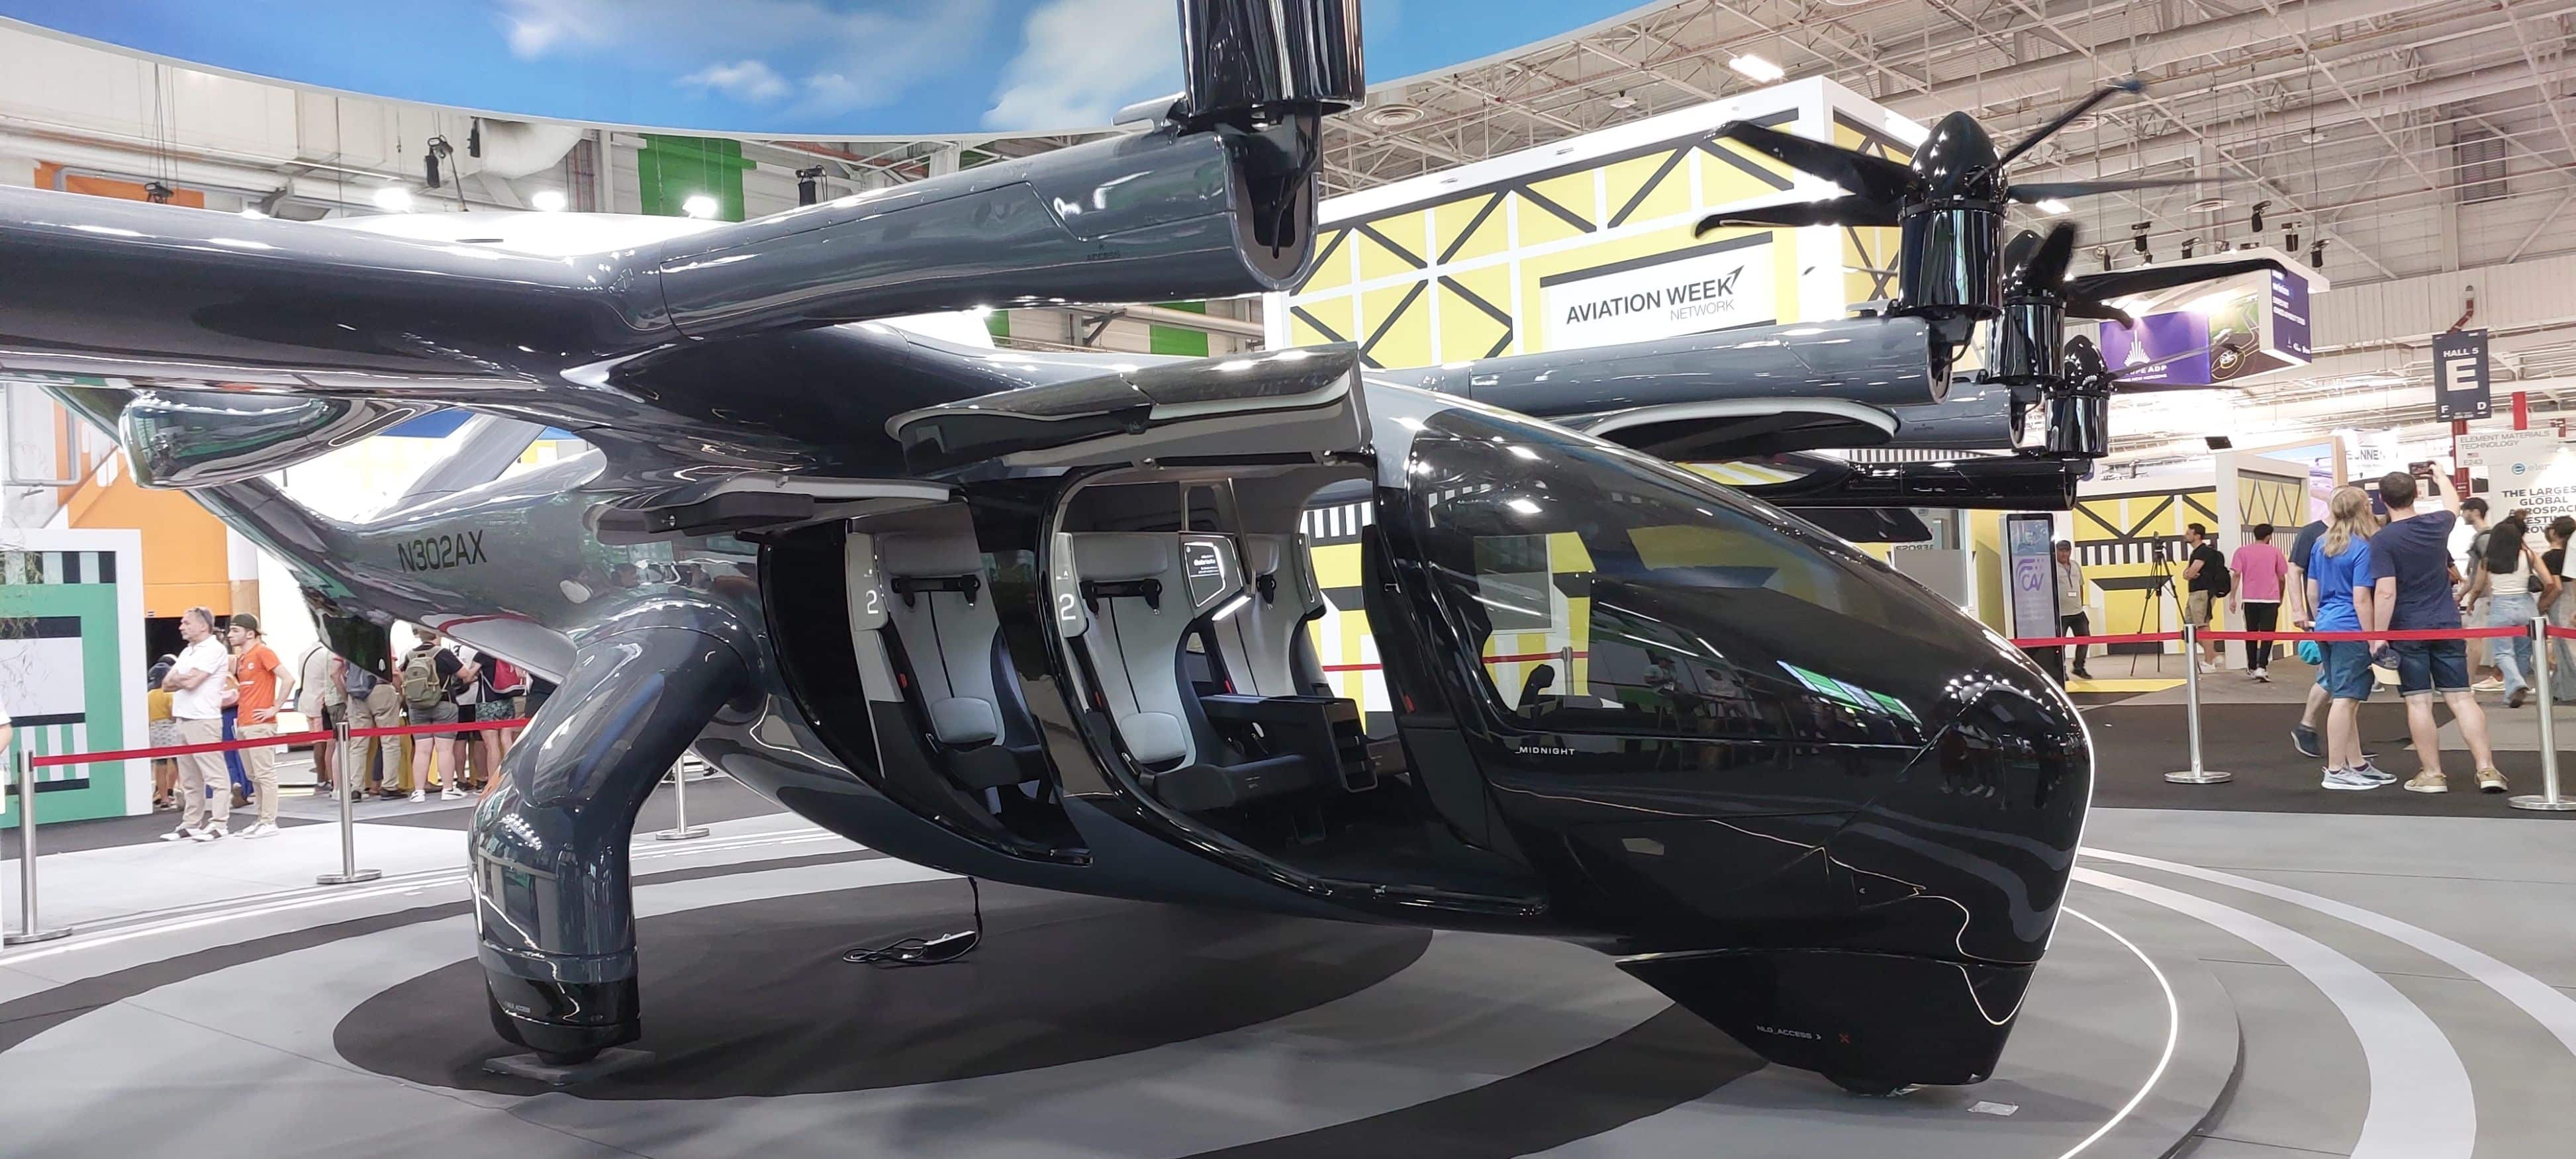 On 24th June,2023. Archer's Evtol aircraft displayed at Paris airshow.